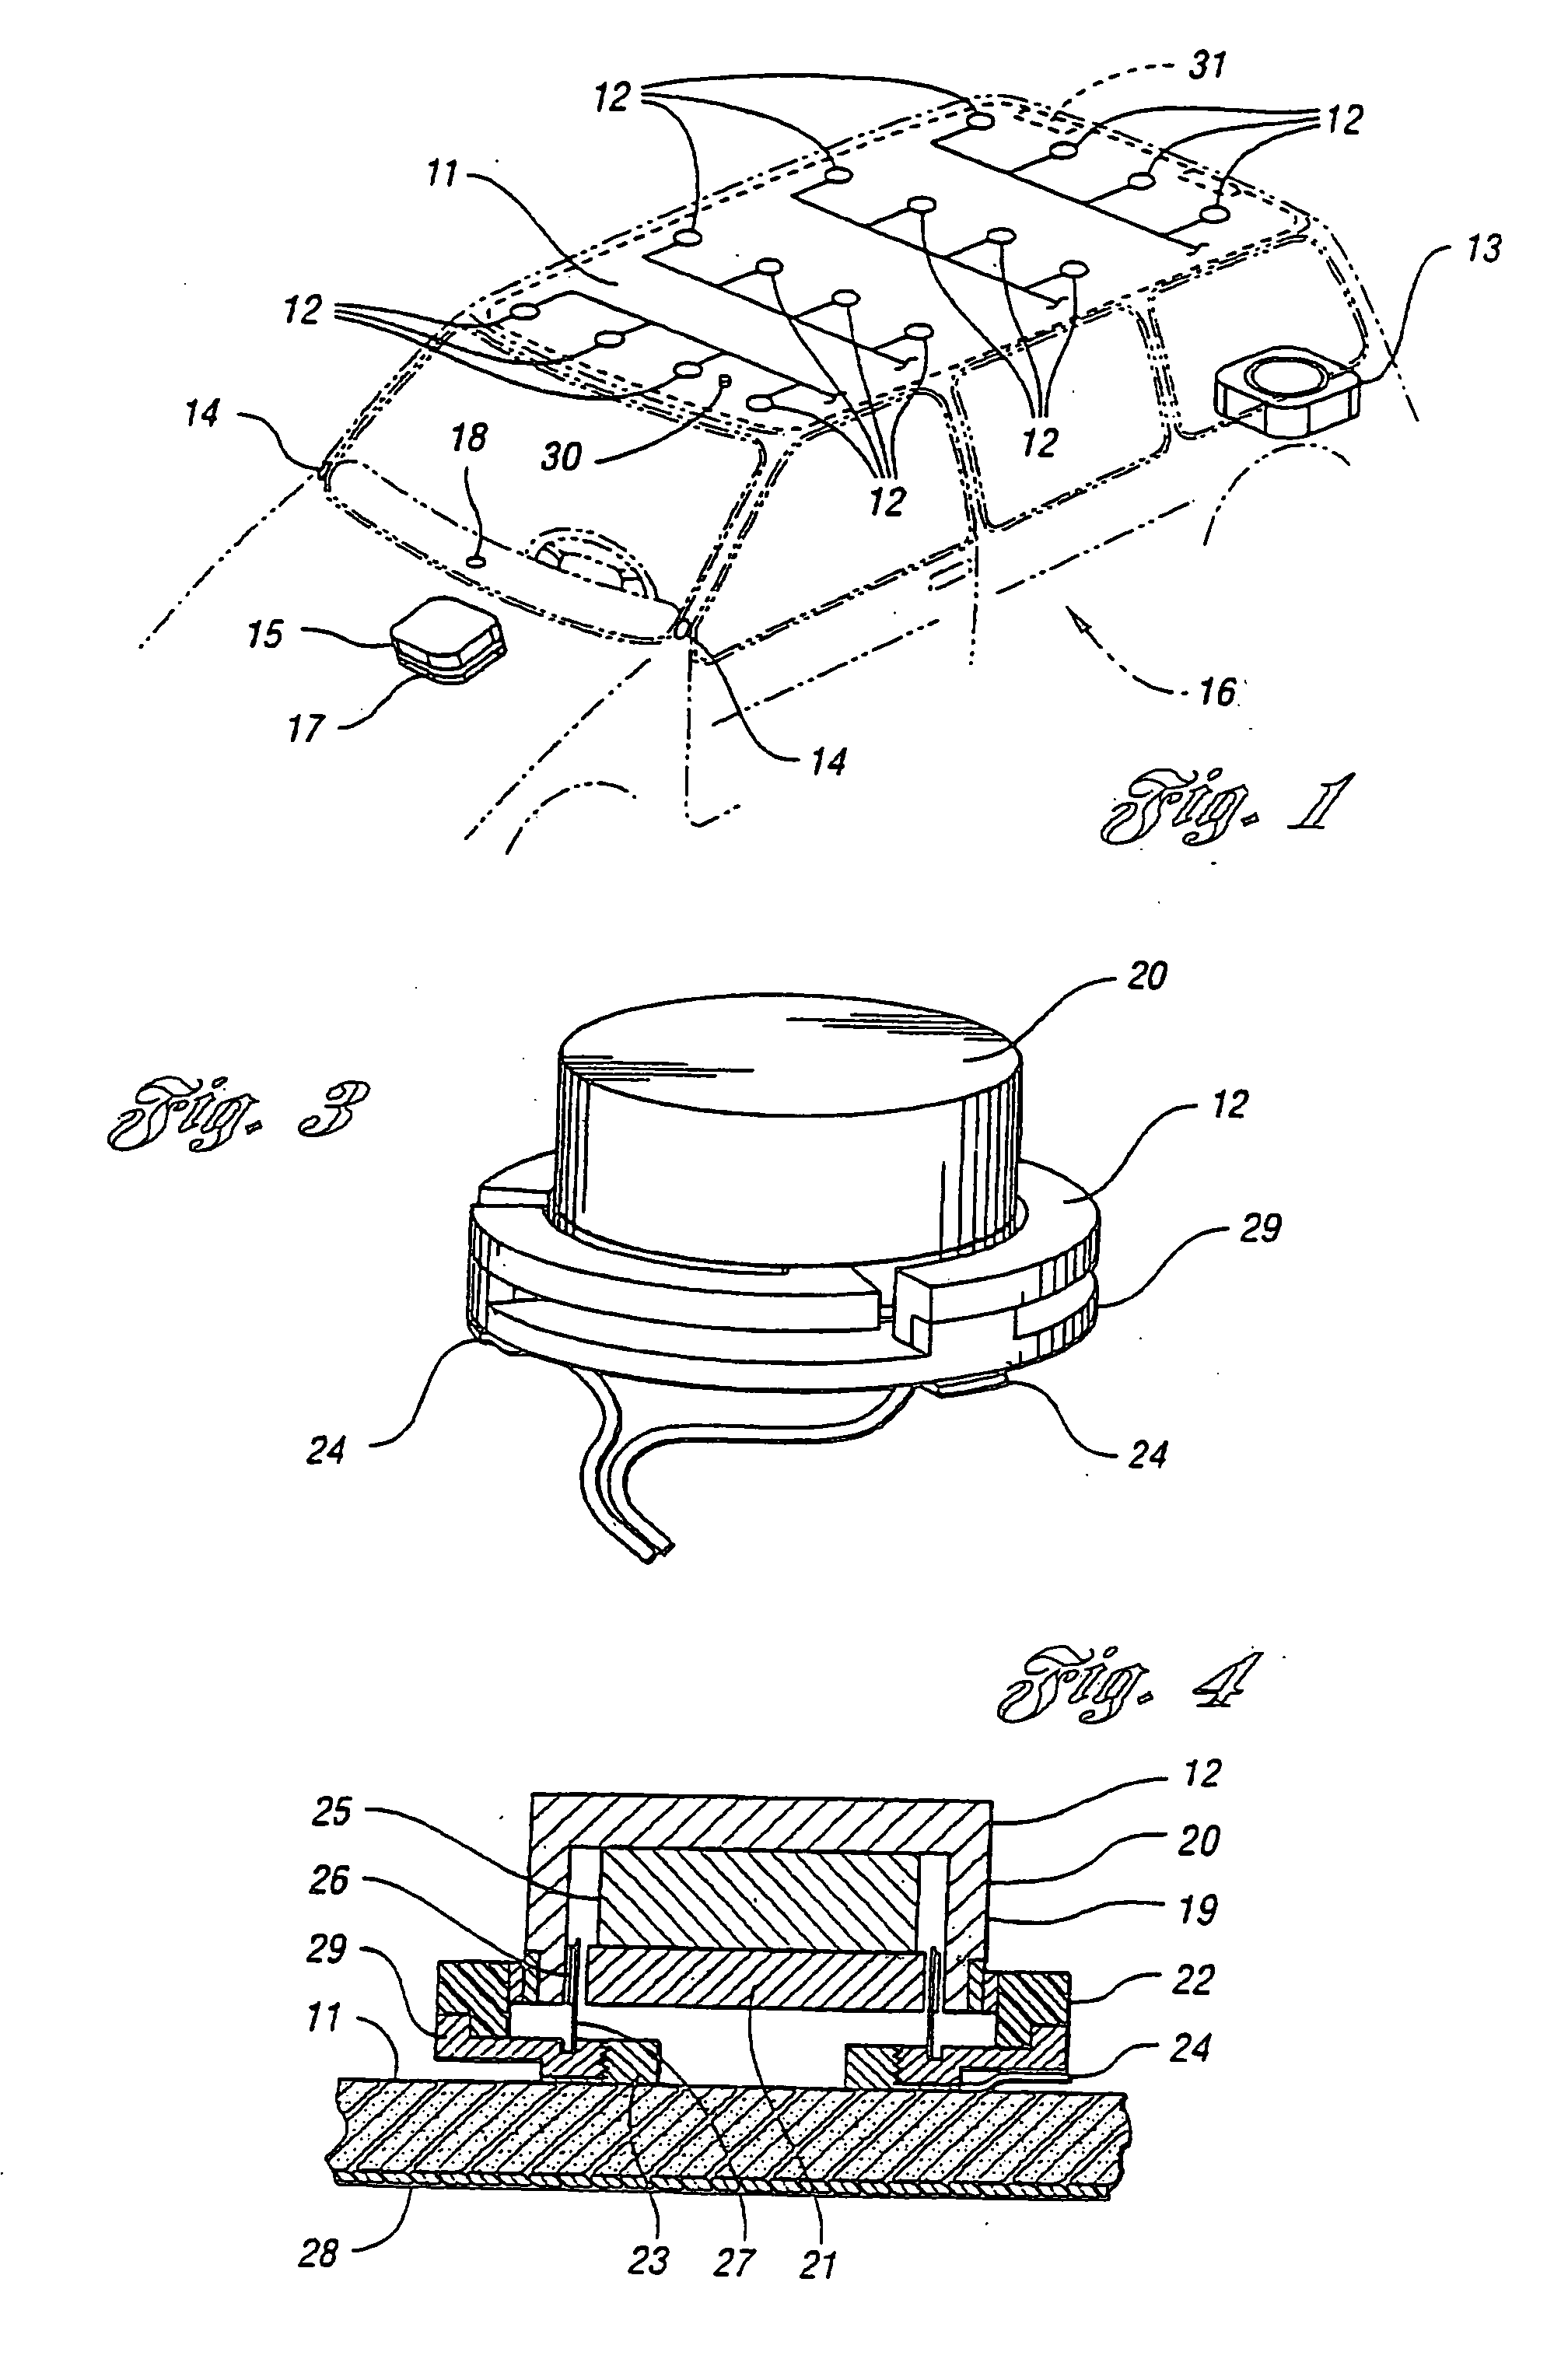 Vehicular audio system including a headliner speaker, electromagnetic transducer assembly for use therein and computer system programmed with a graphic software control for changing the audio system's signal level and delay